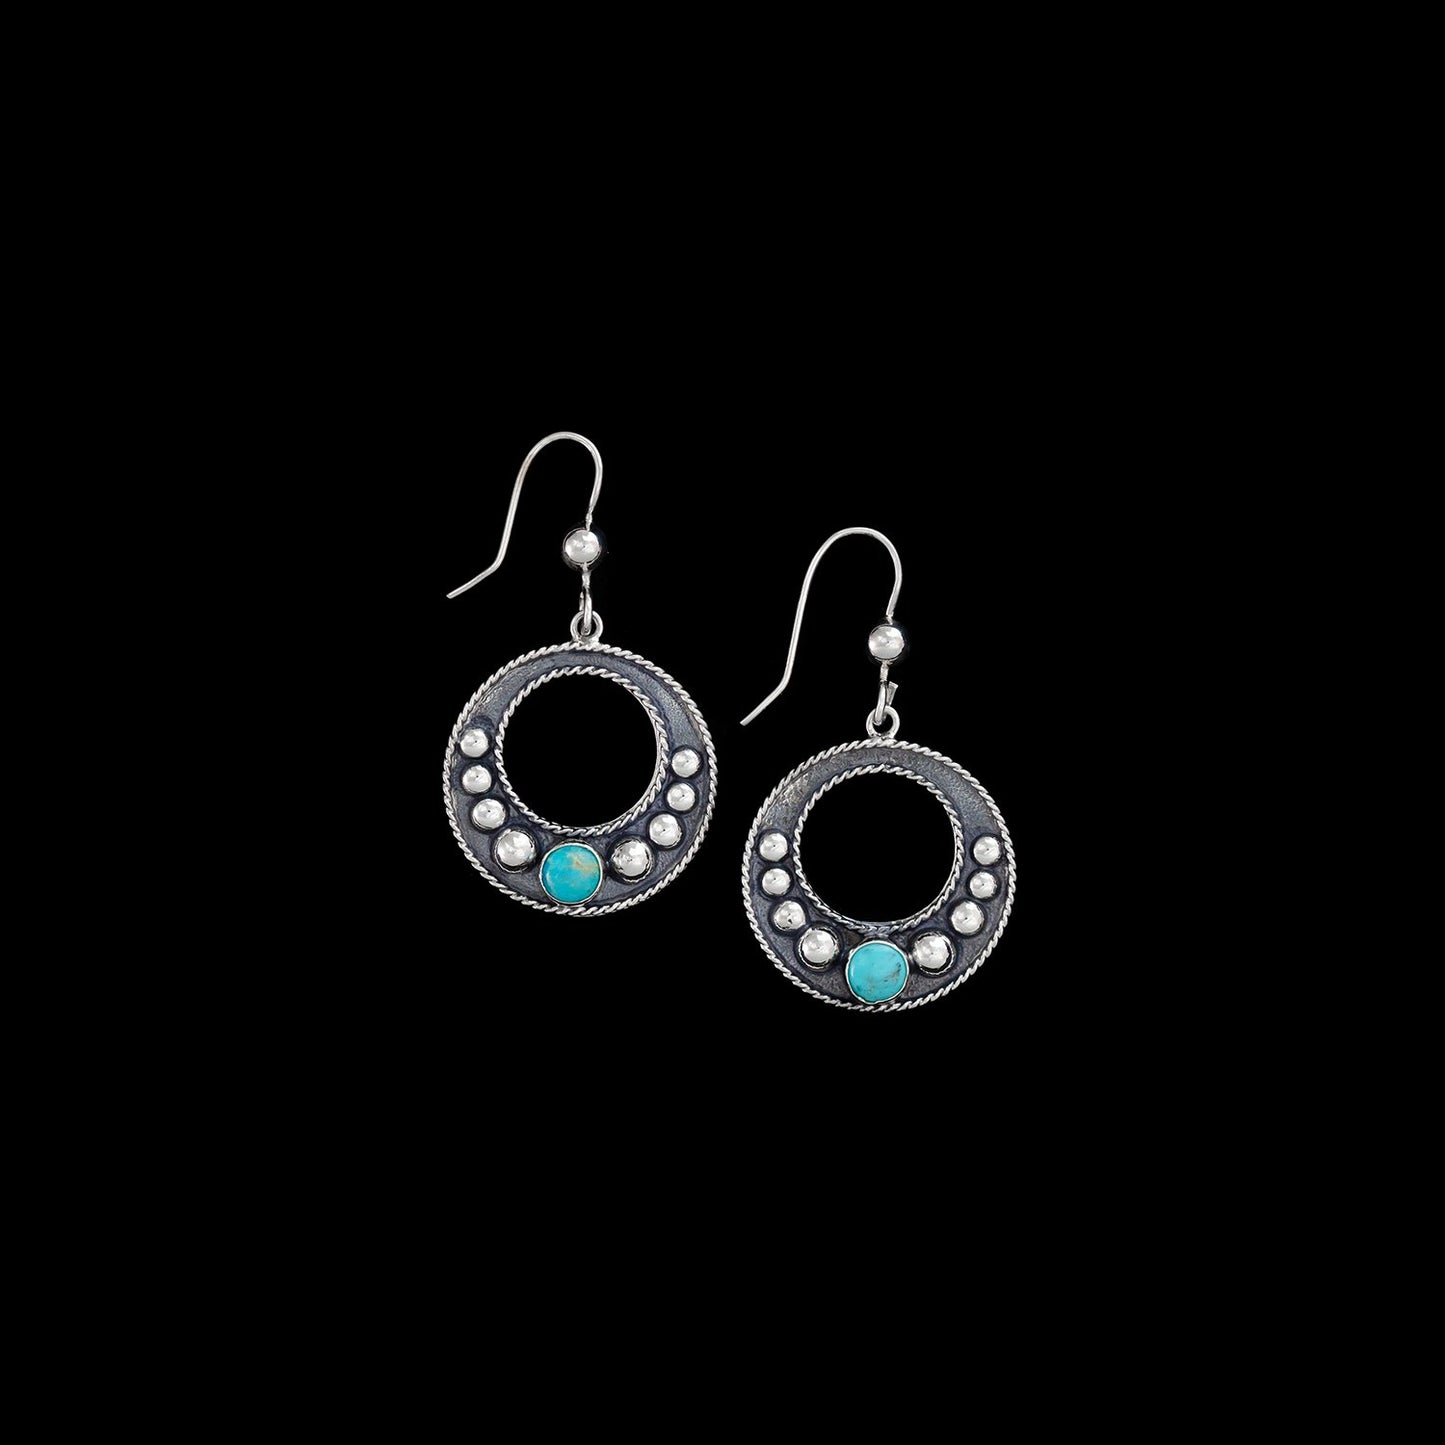 VOGT 011-767 Ladies The Turquoise By Blair - Earrings